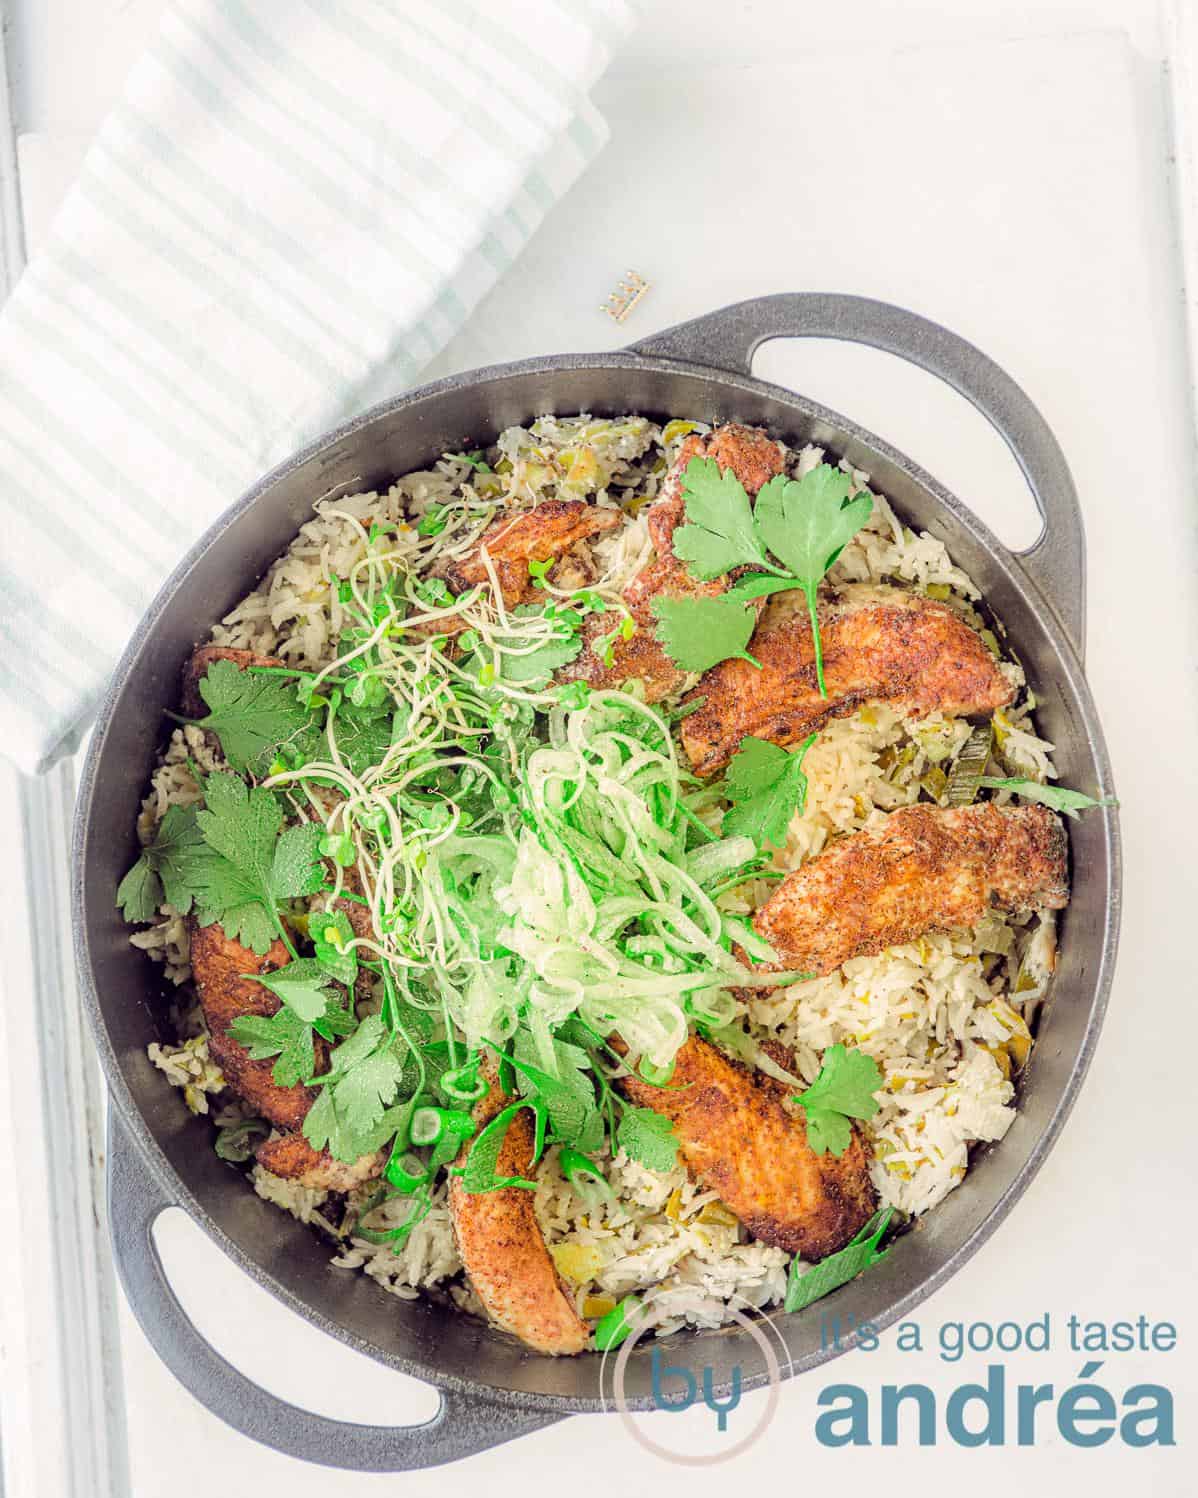 Savory Chicken and Rice Recipe for Dinner Tonight